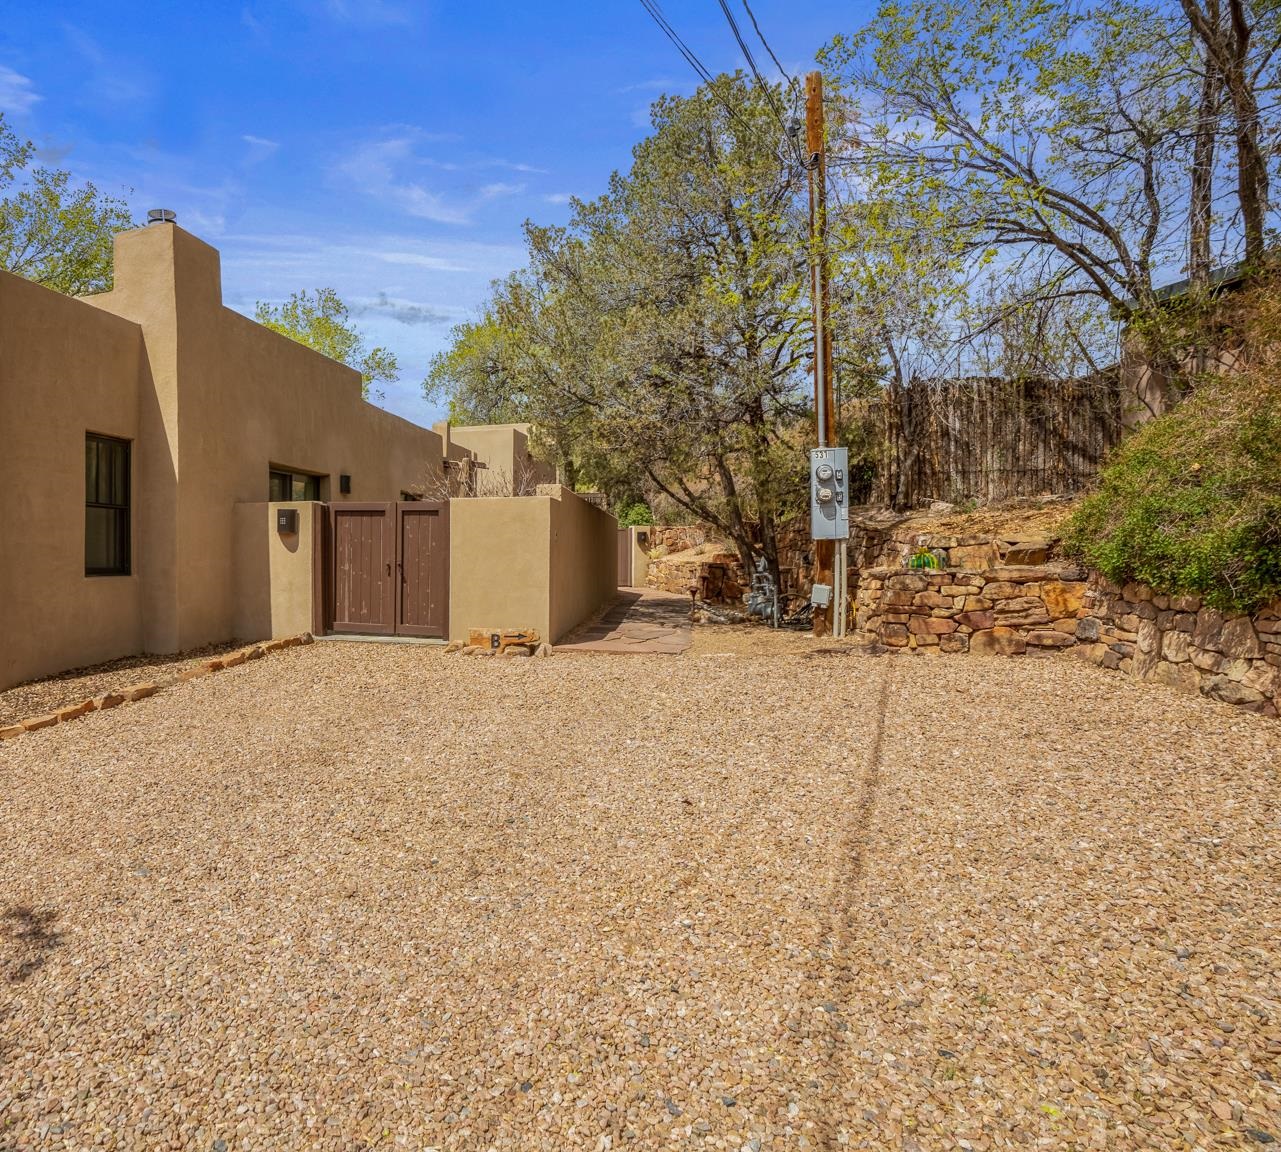 531 Dolores St Unit B, Santa Fe, New Mexico 87501, 2 Bedrooms Bedrooms, ,2 BathroomsBathrooms,Residential,For Sale,531 Dolores St Unit B,202201338